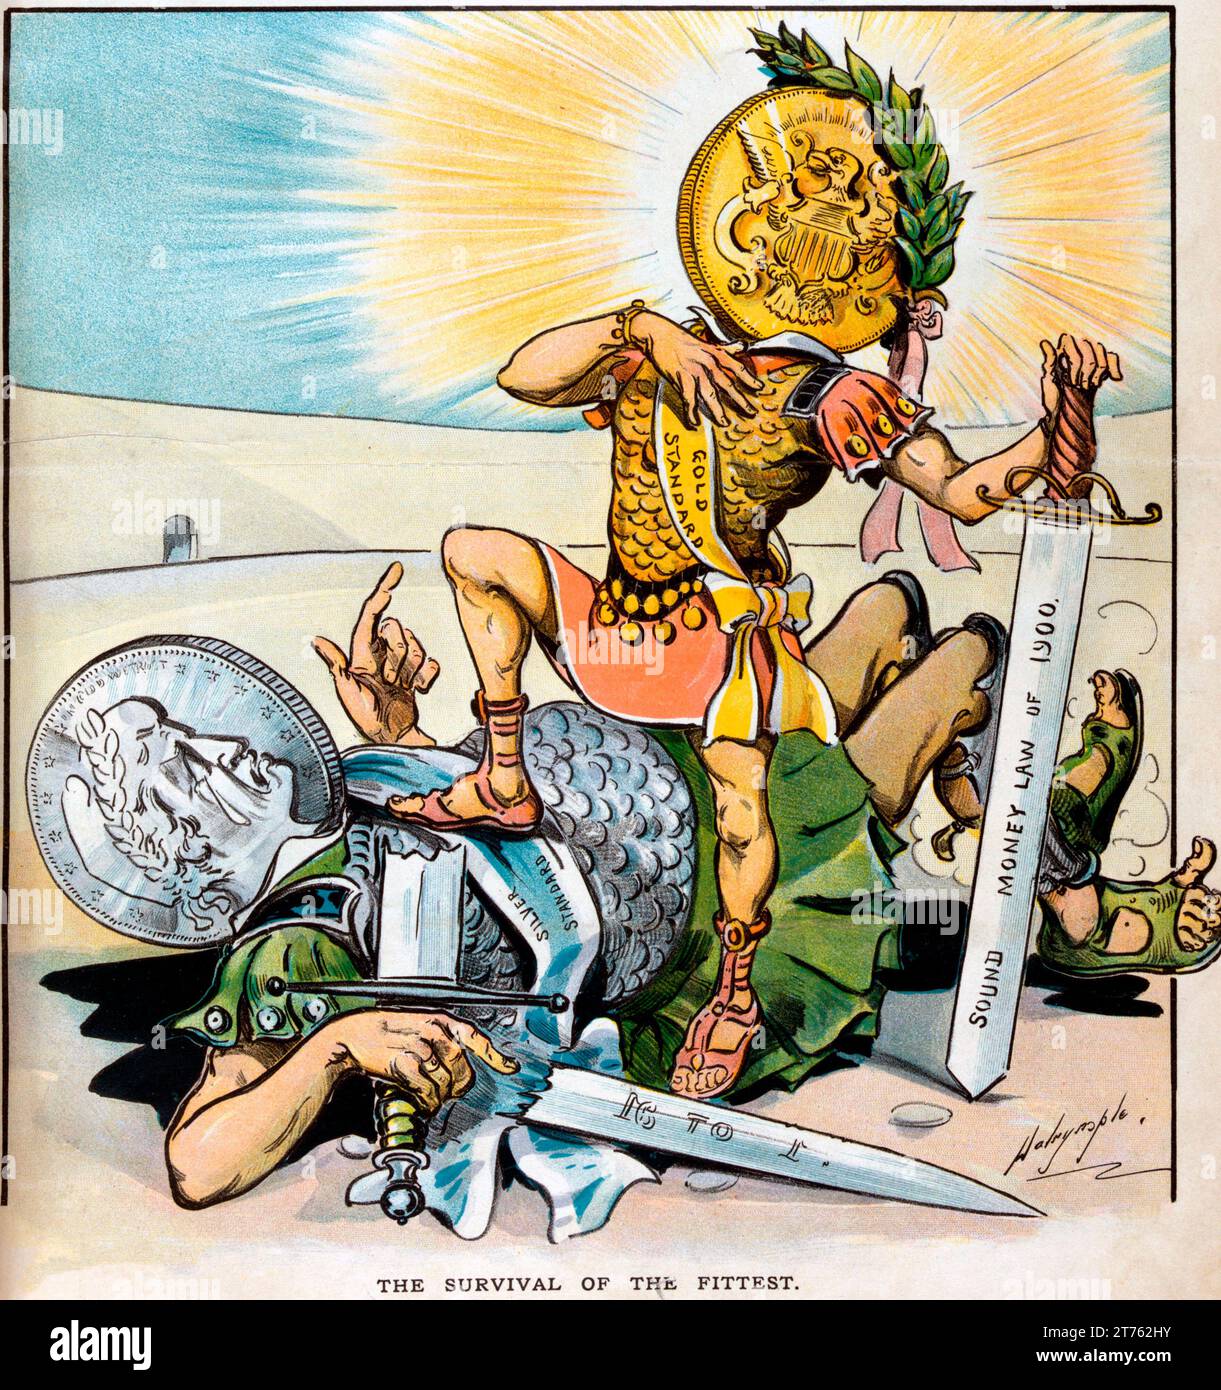 Cover image of Puck Magazine, v. 47, no. 1201 (1900 March 14). Illustration showing two gladiators, one labeled 'Gold Standard' and the other labeled 'Silver Standard', in a colosseum. The 'Gold Standard' gladiator, with a sword labeled 'SOUND MONEY LAW OF 1900', stands victorious over the 'Silver Standard' gladiator whose sword, labeled '16 to 1', lies broken at his side. Stock Photo